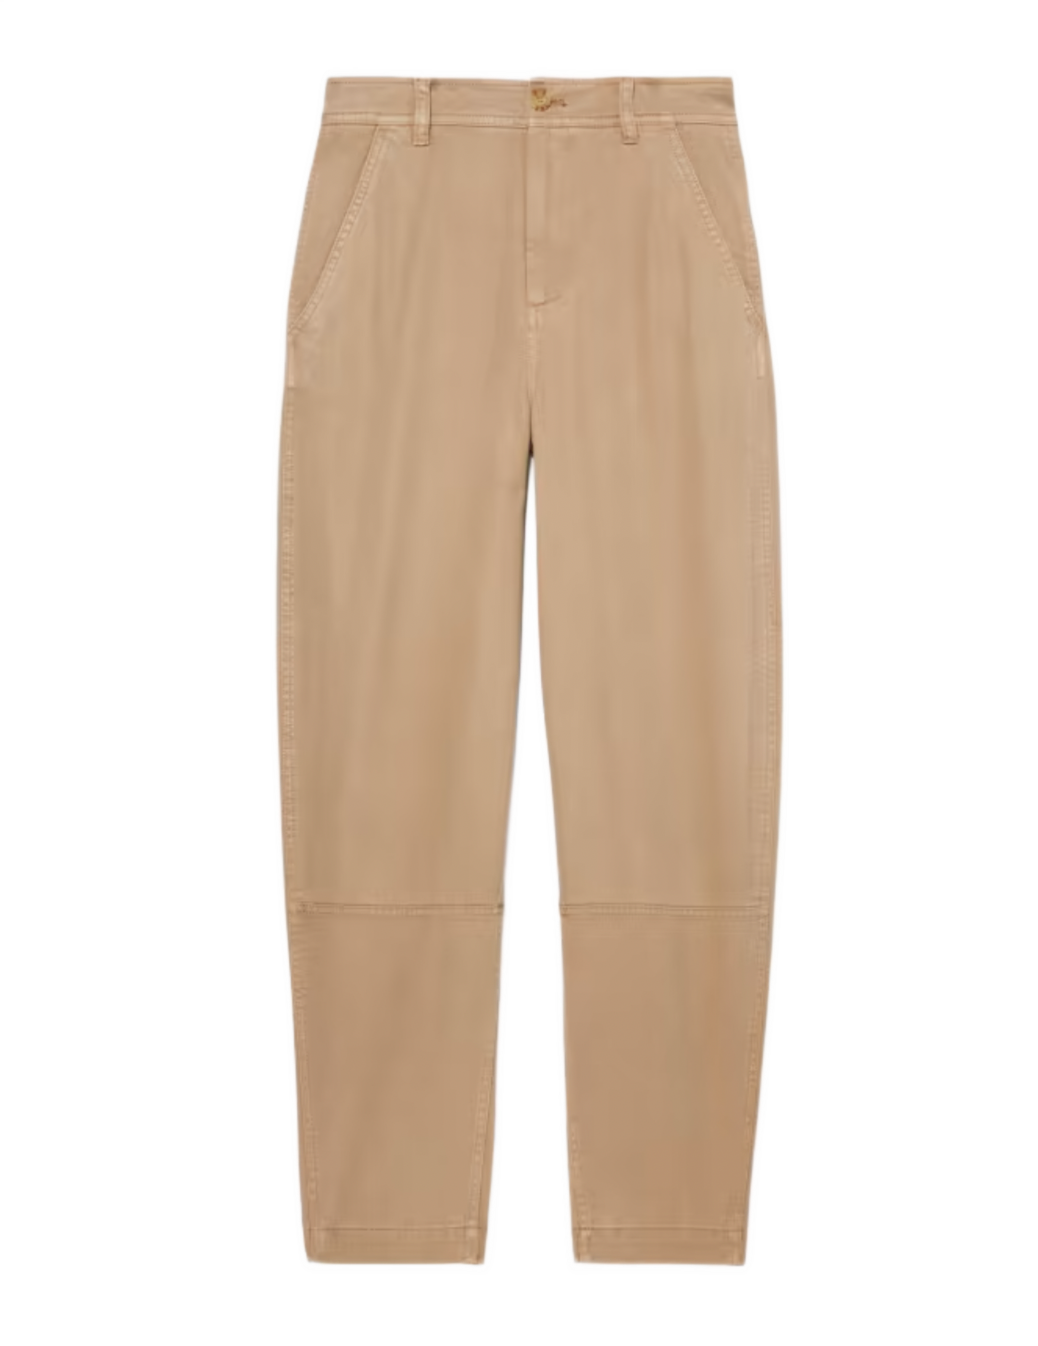 The TENCEL™ Relaxed Chino